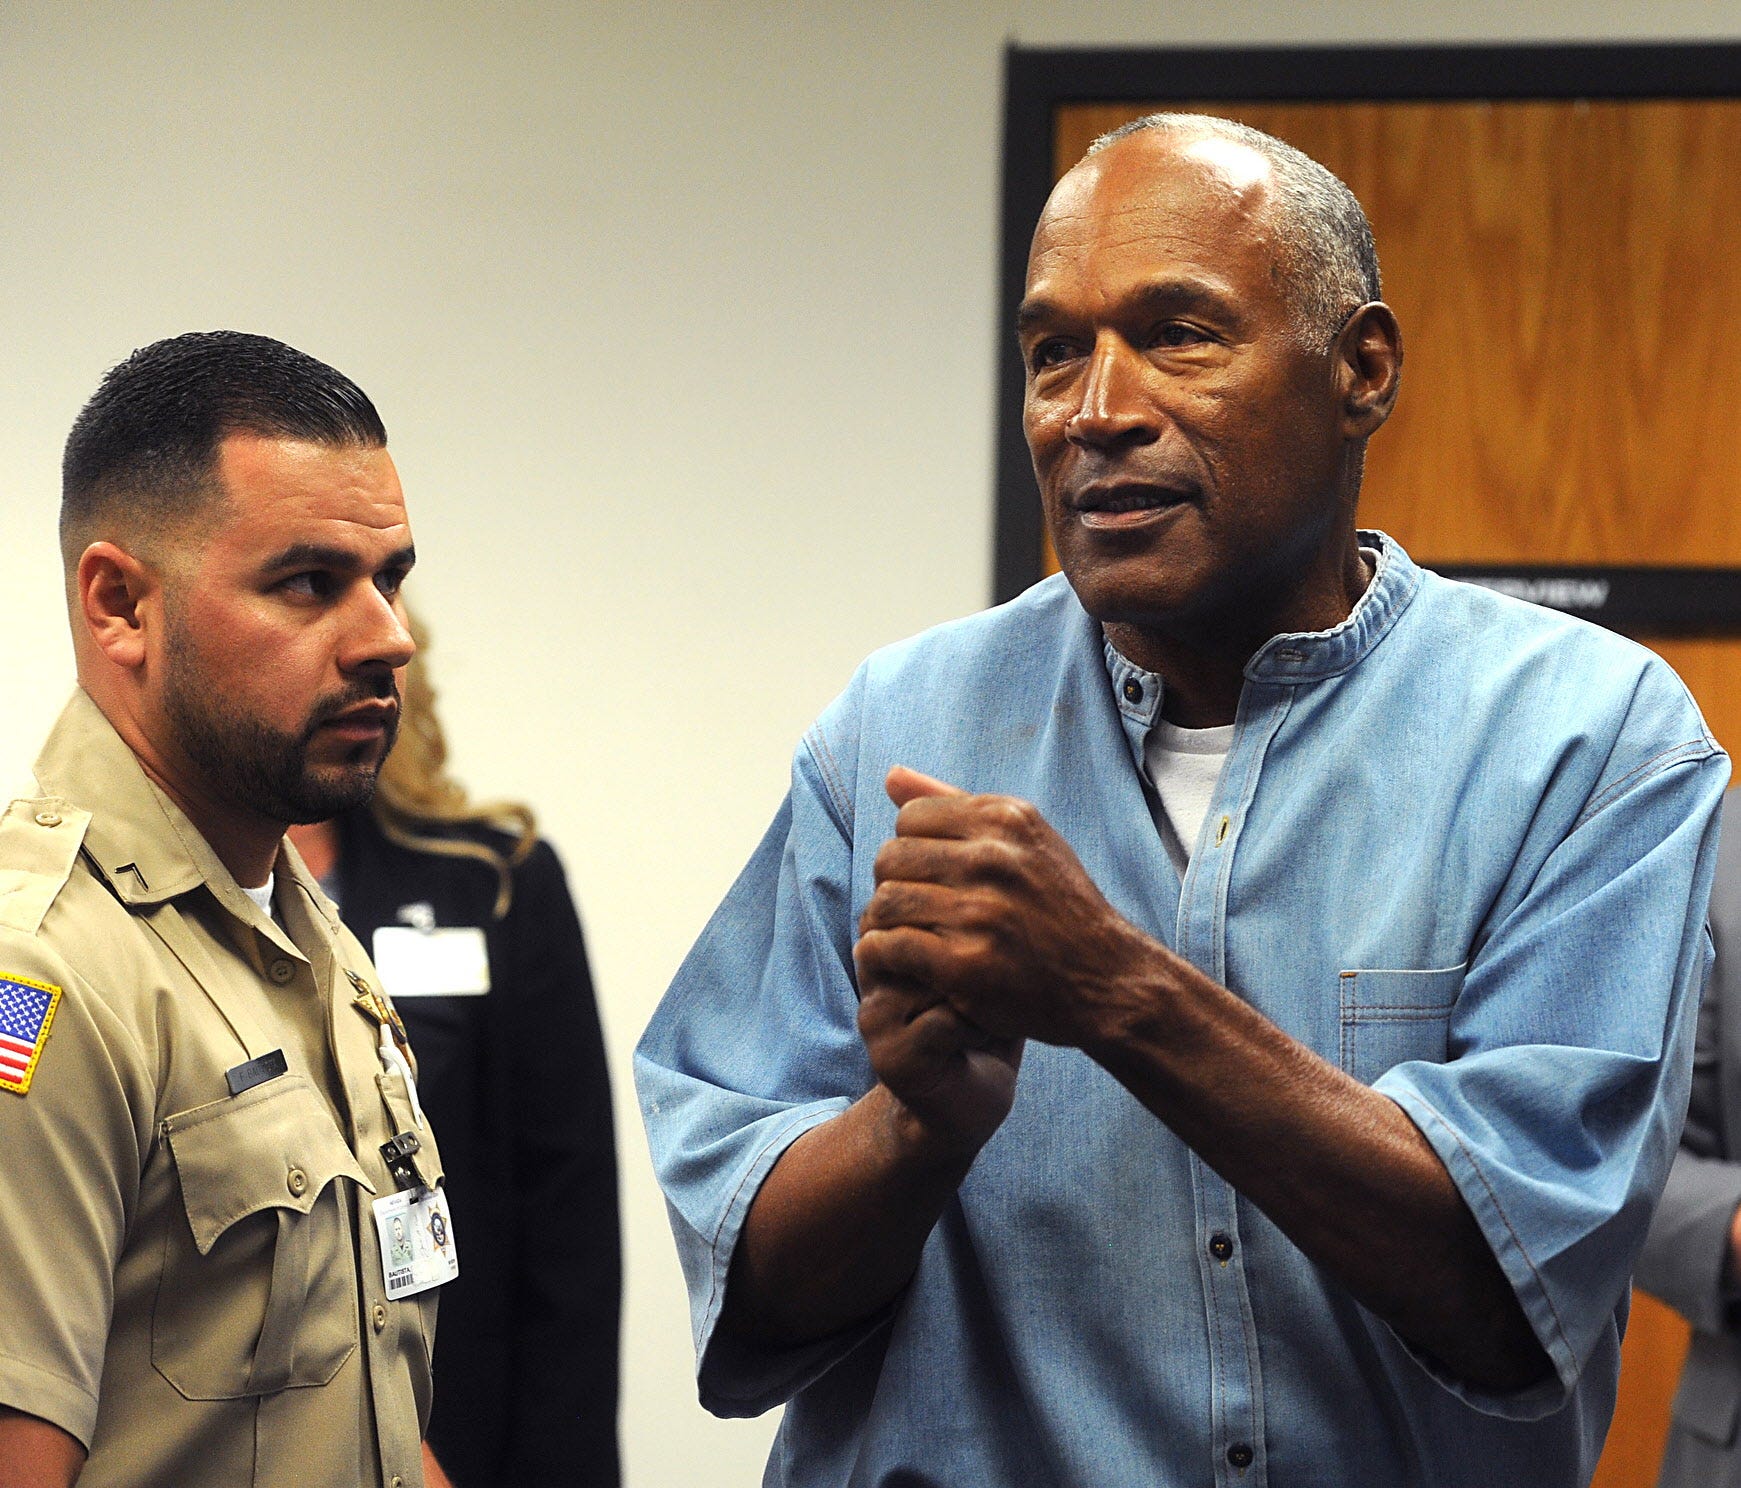 An O.J. Simpson pop-up museum is coming to L.A. in August.